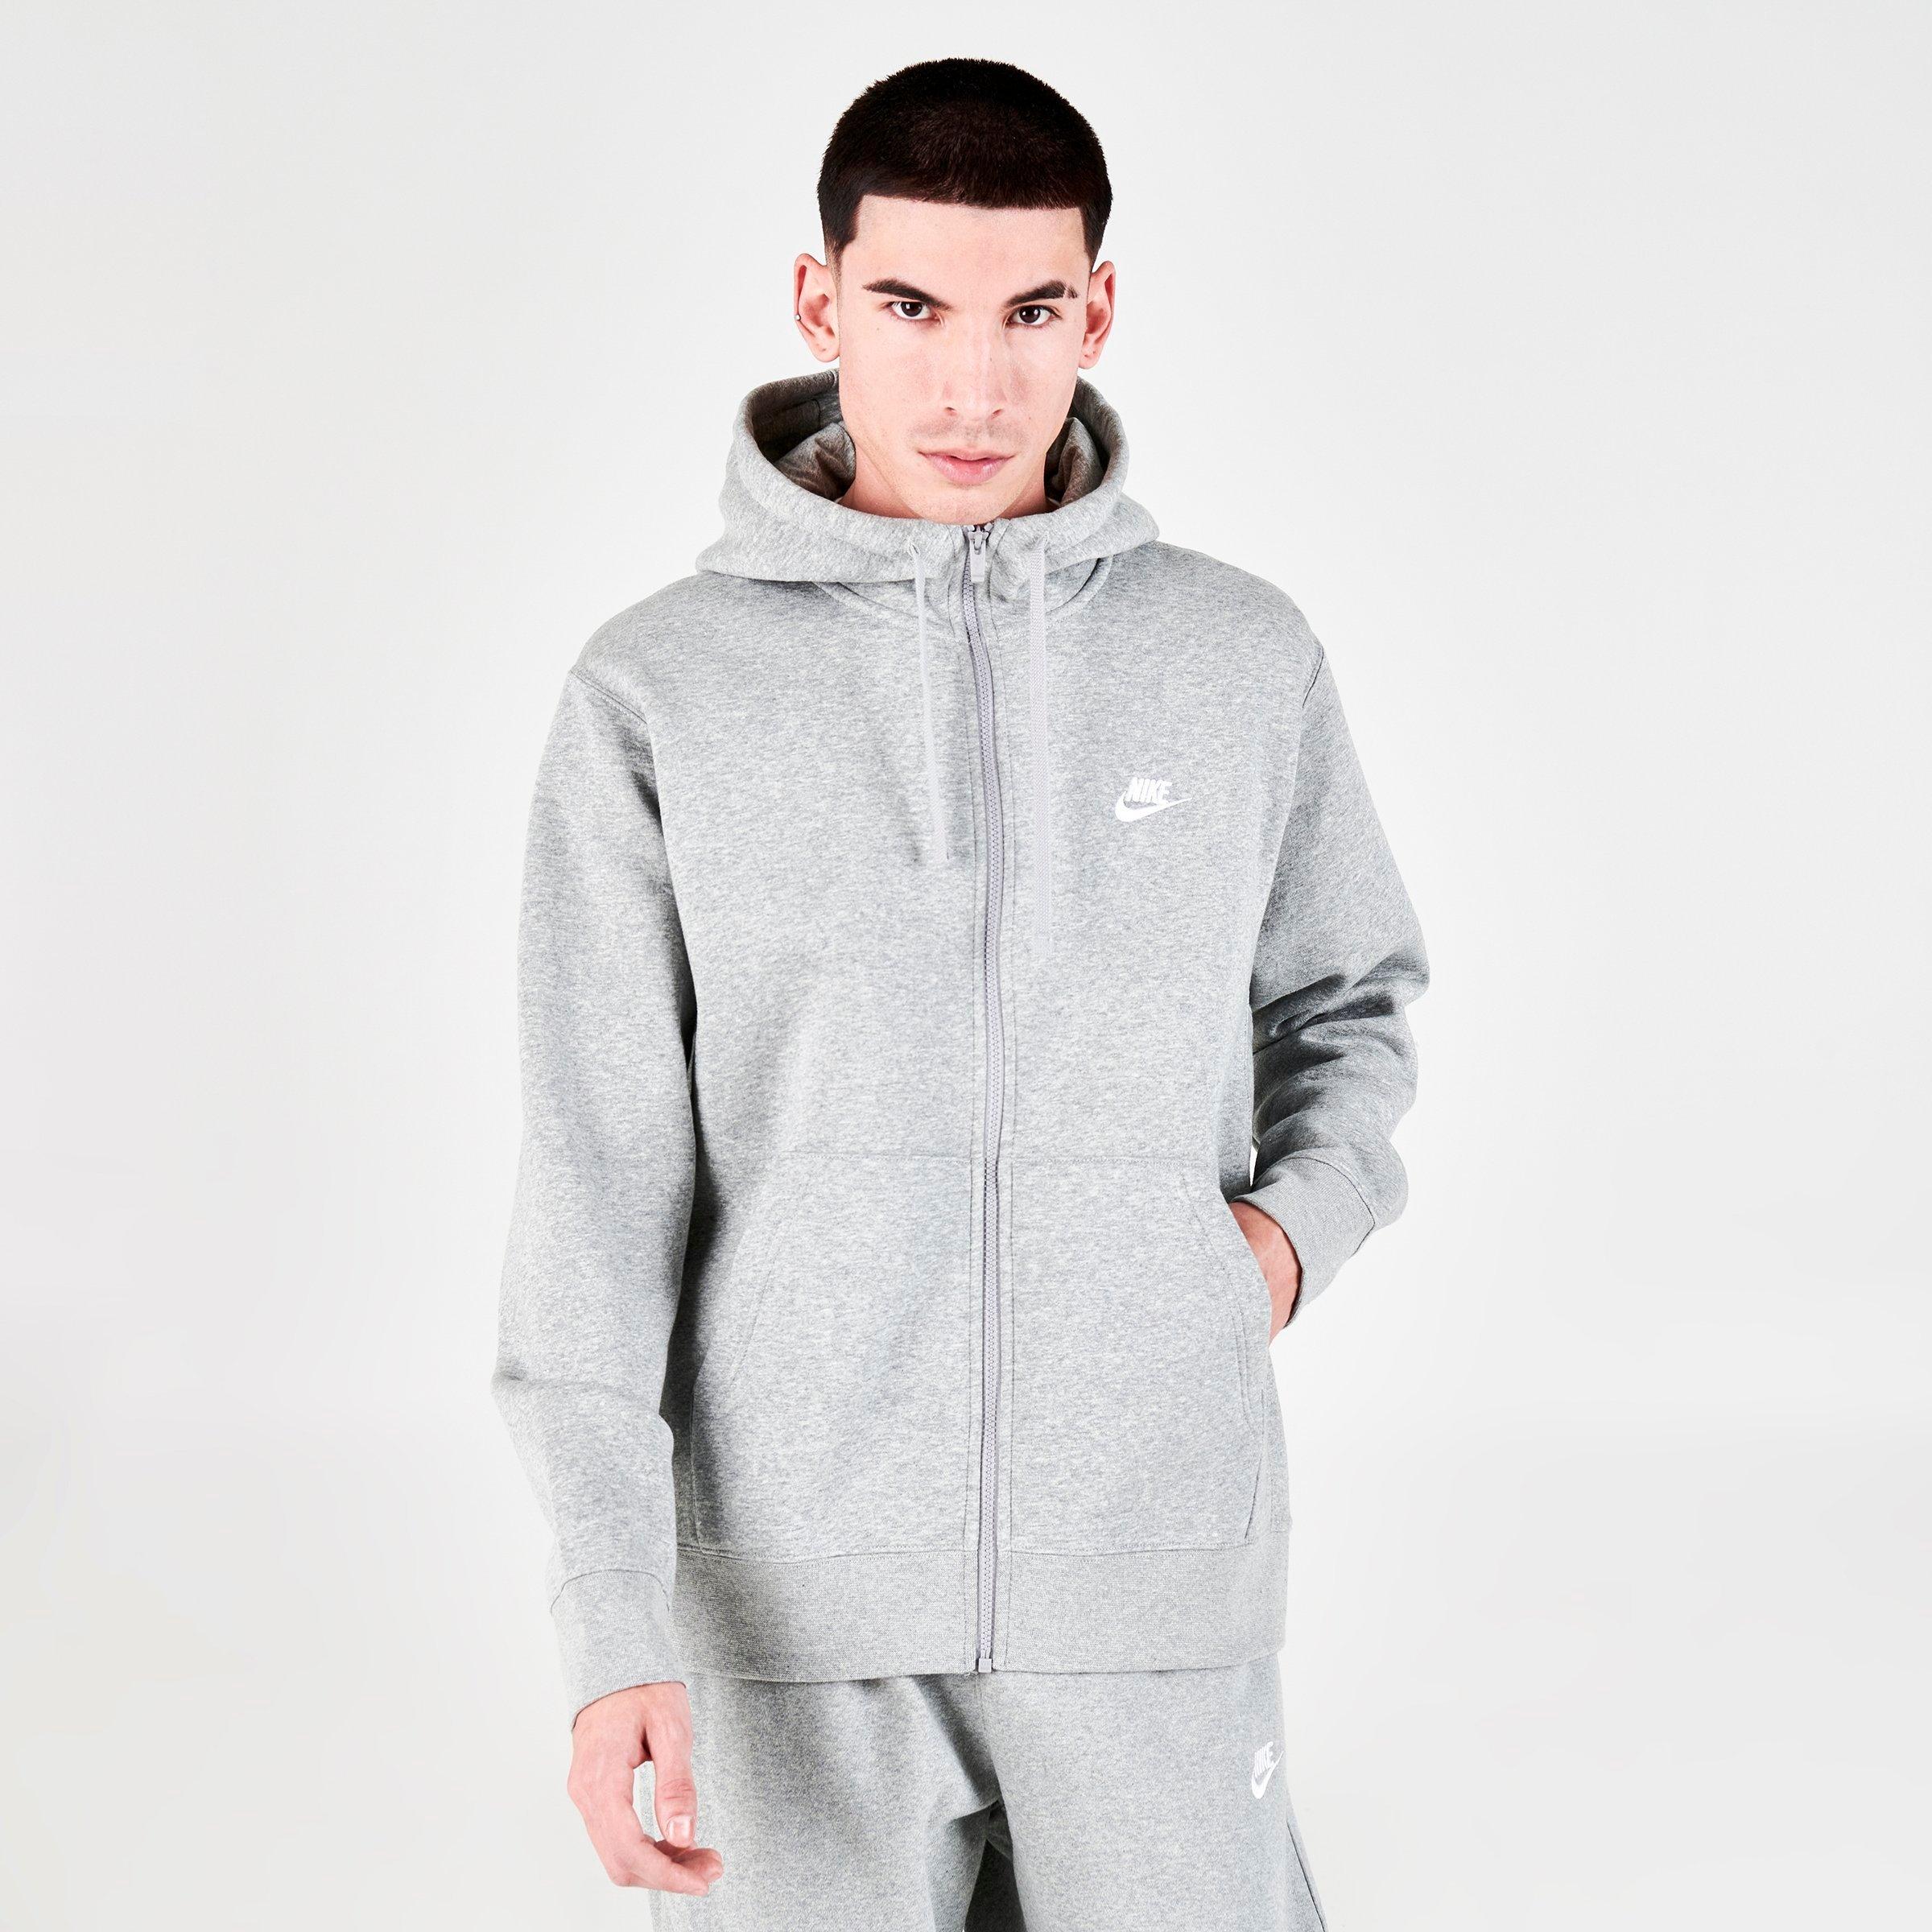 men's nike jogging outfits